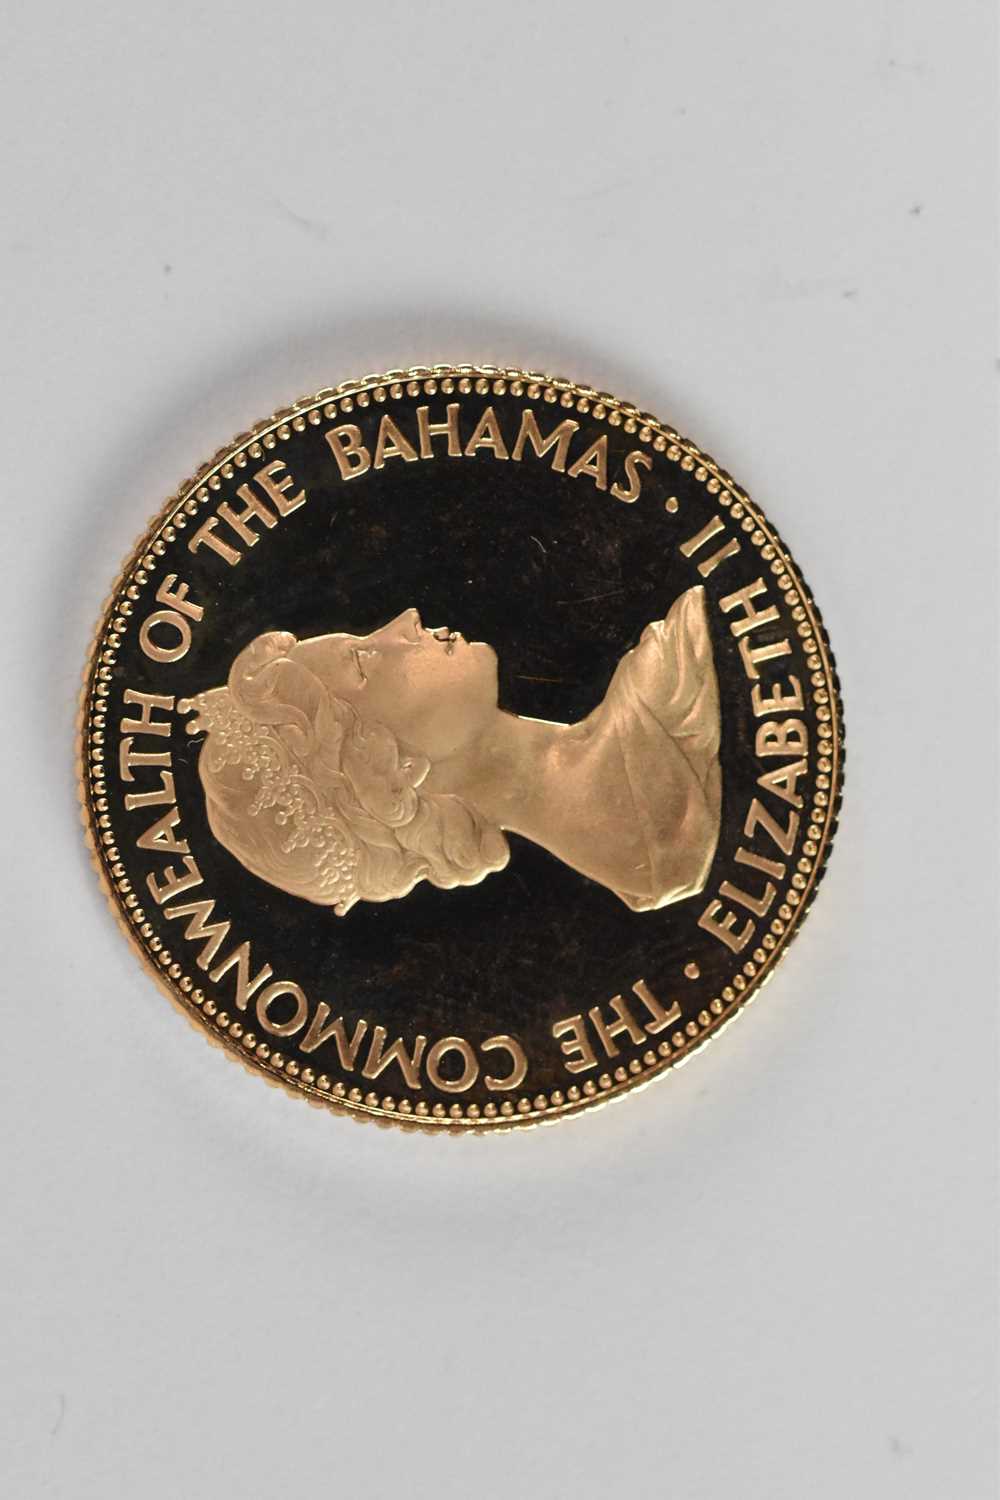 An Elizabeth II Commonwealth of The Bahamas 1973 Independence fifty dollar coin, diameter 2.8cm, - Image 2 of 2